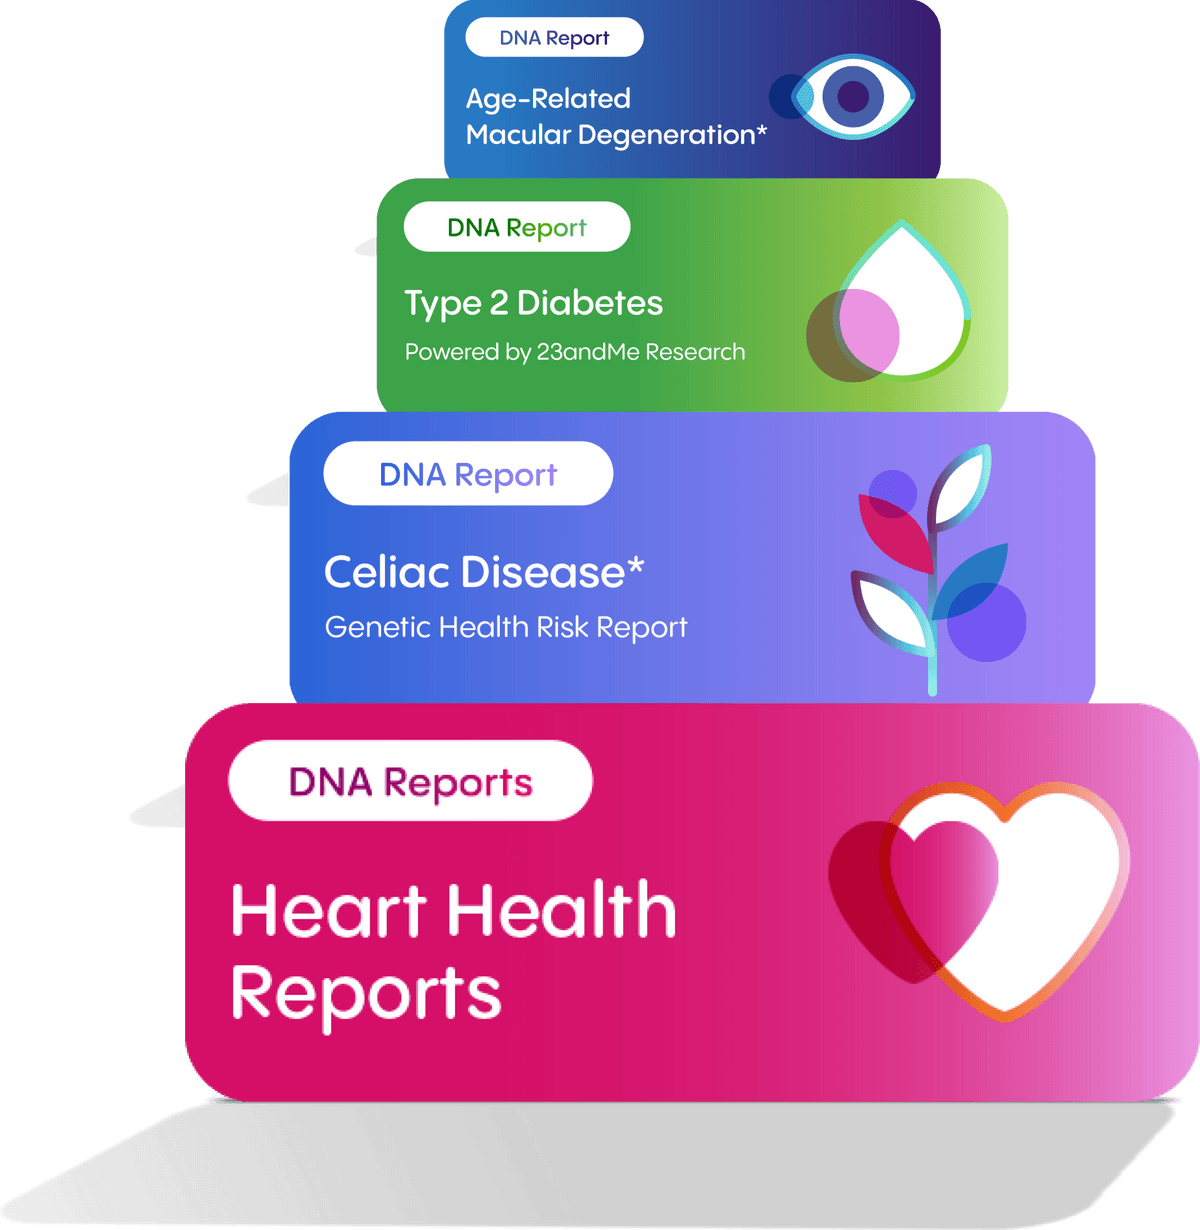 Health + Ancestry Kits come with a variety of DNA reports including Heart Health Reports, Celiac Disease* (Genetic Health Risk Report), Type 2 Diabetes (Powered by 23andMe Research) and Age-Related Macular Degeneration.*